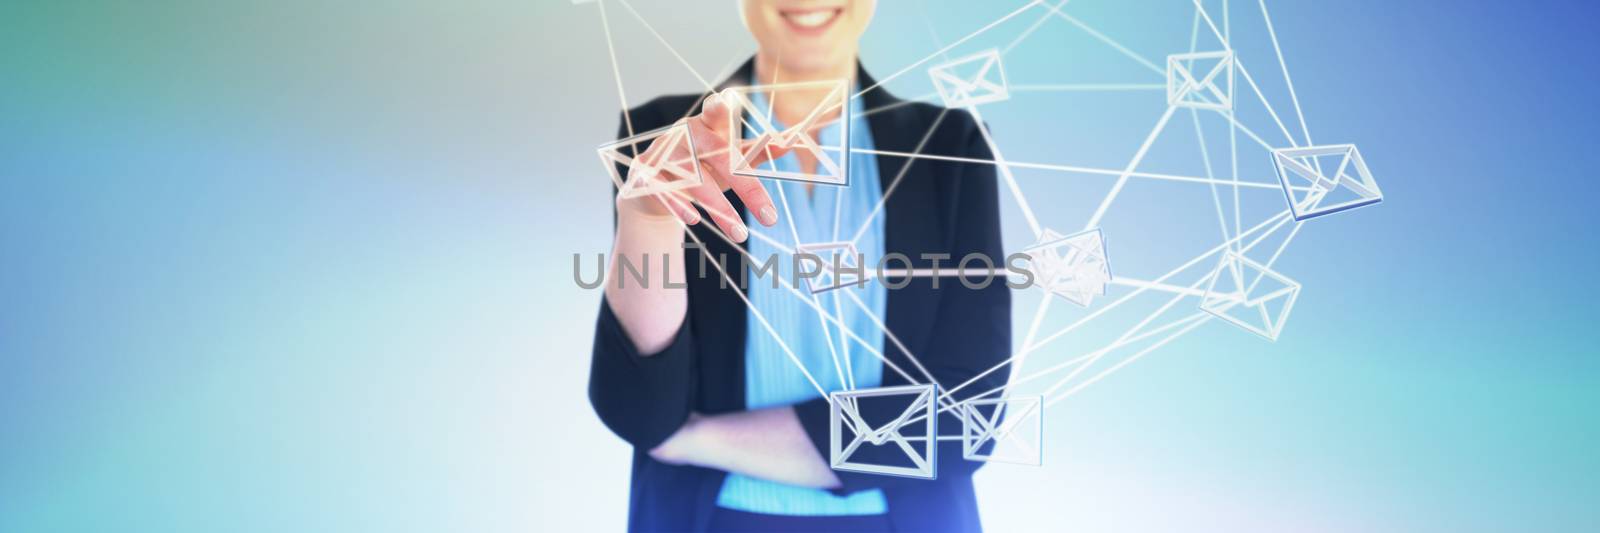 Composite image of mid section of smiling businesswoman pointing by Wavebreakmedia